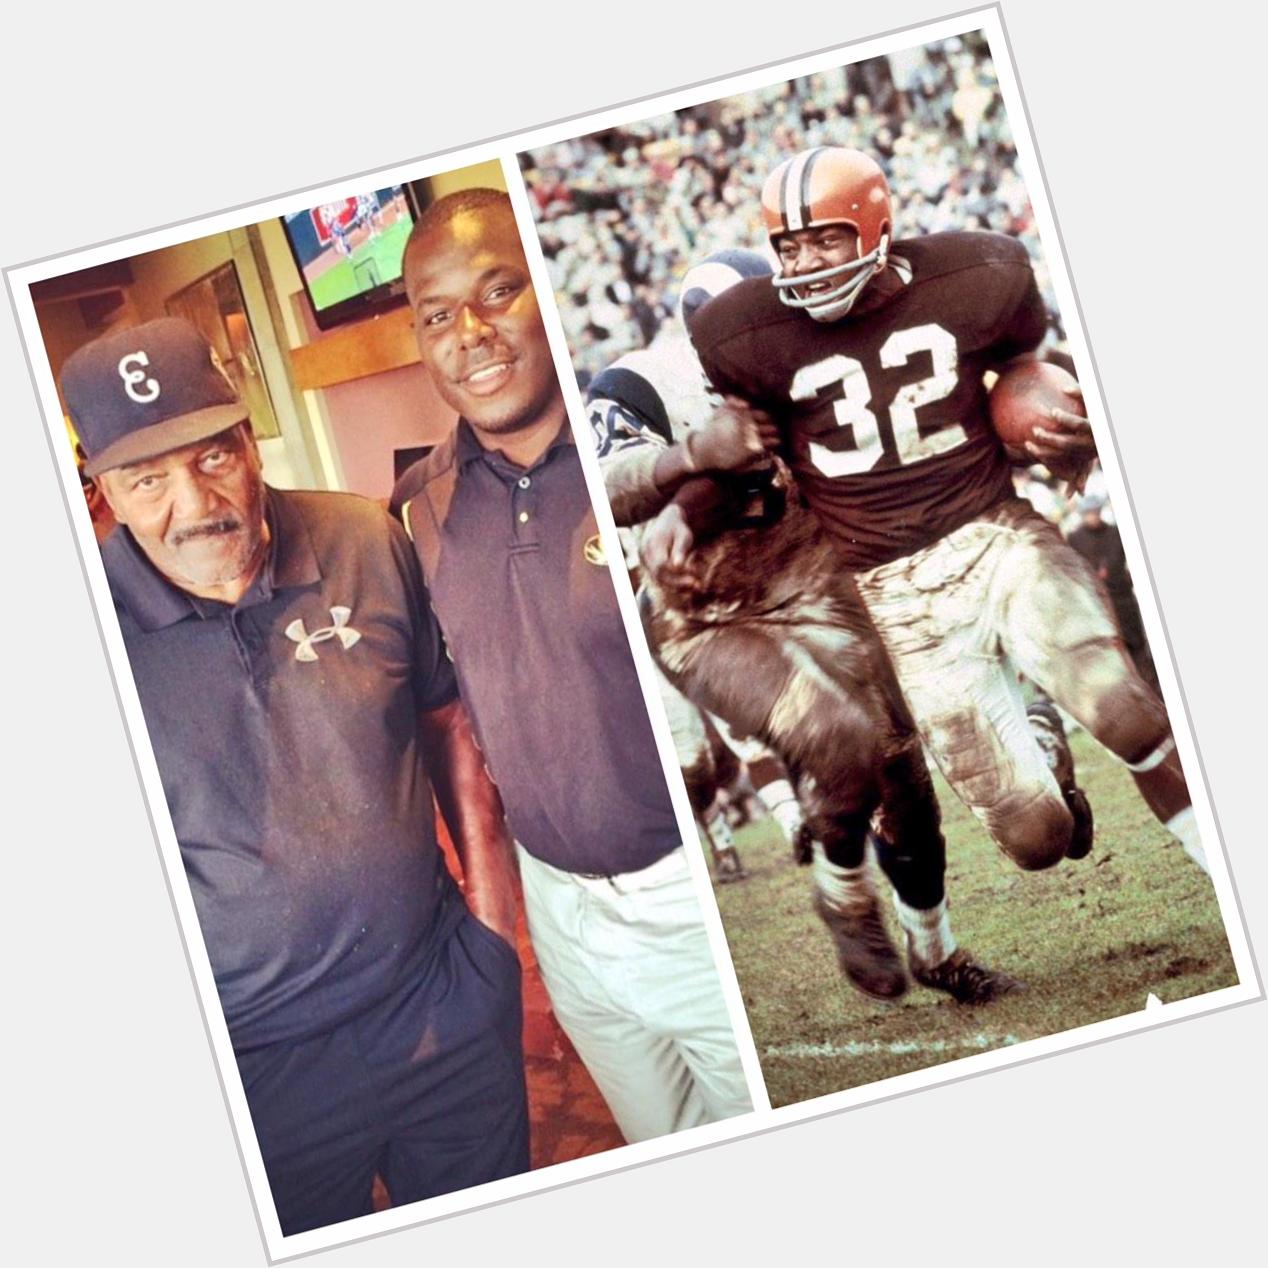 Happy Birthday to the Greatest to ever do it. Mr. Jim Brown 